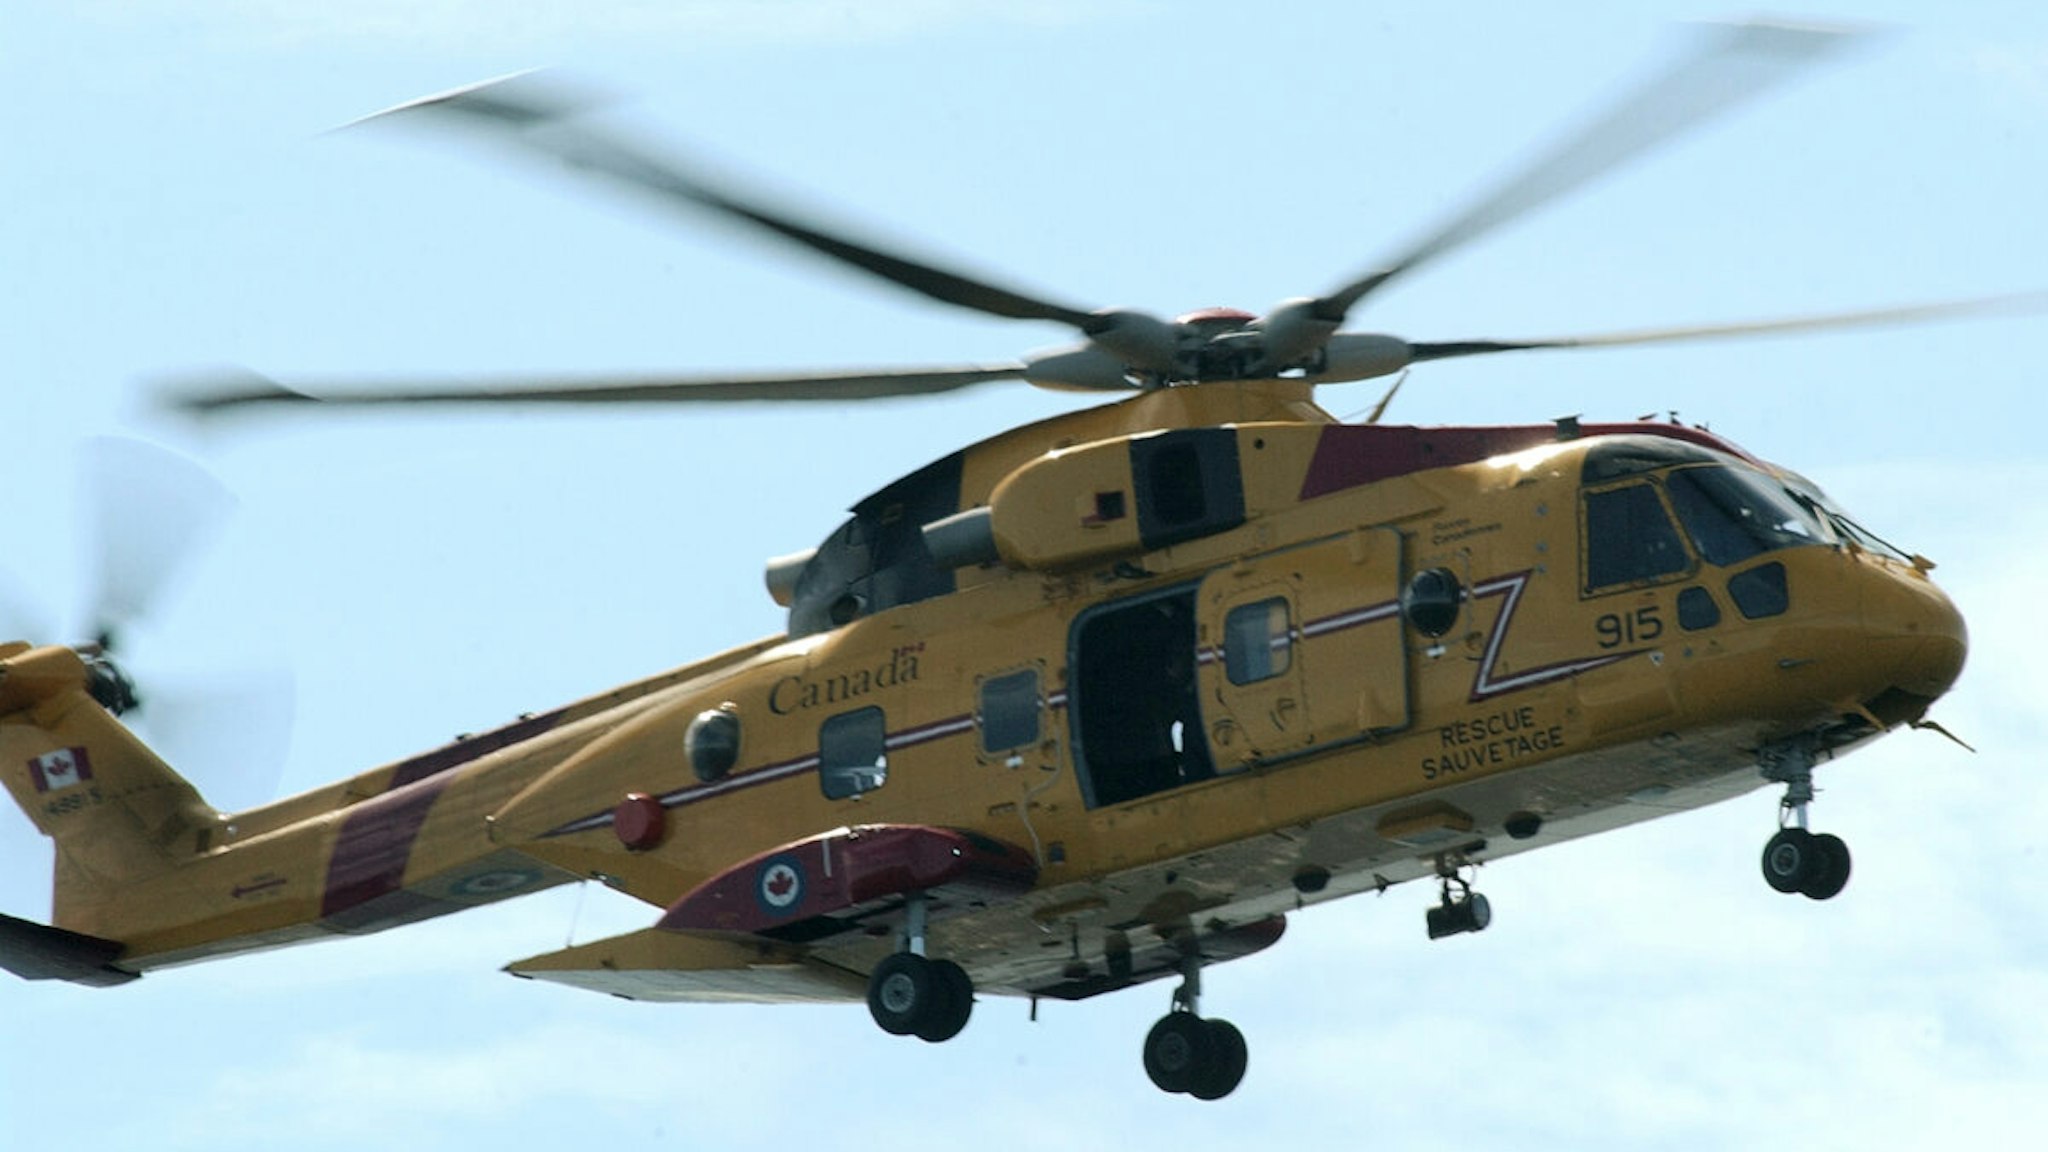 The annual Canadian International Airshow along the waterfront had its first full show today. On display was another new aircraft to the Canadian Forces, the CH-149 Cormorant.